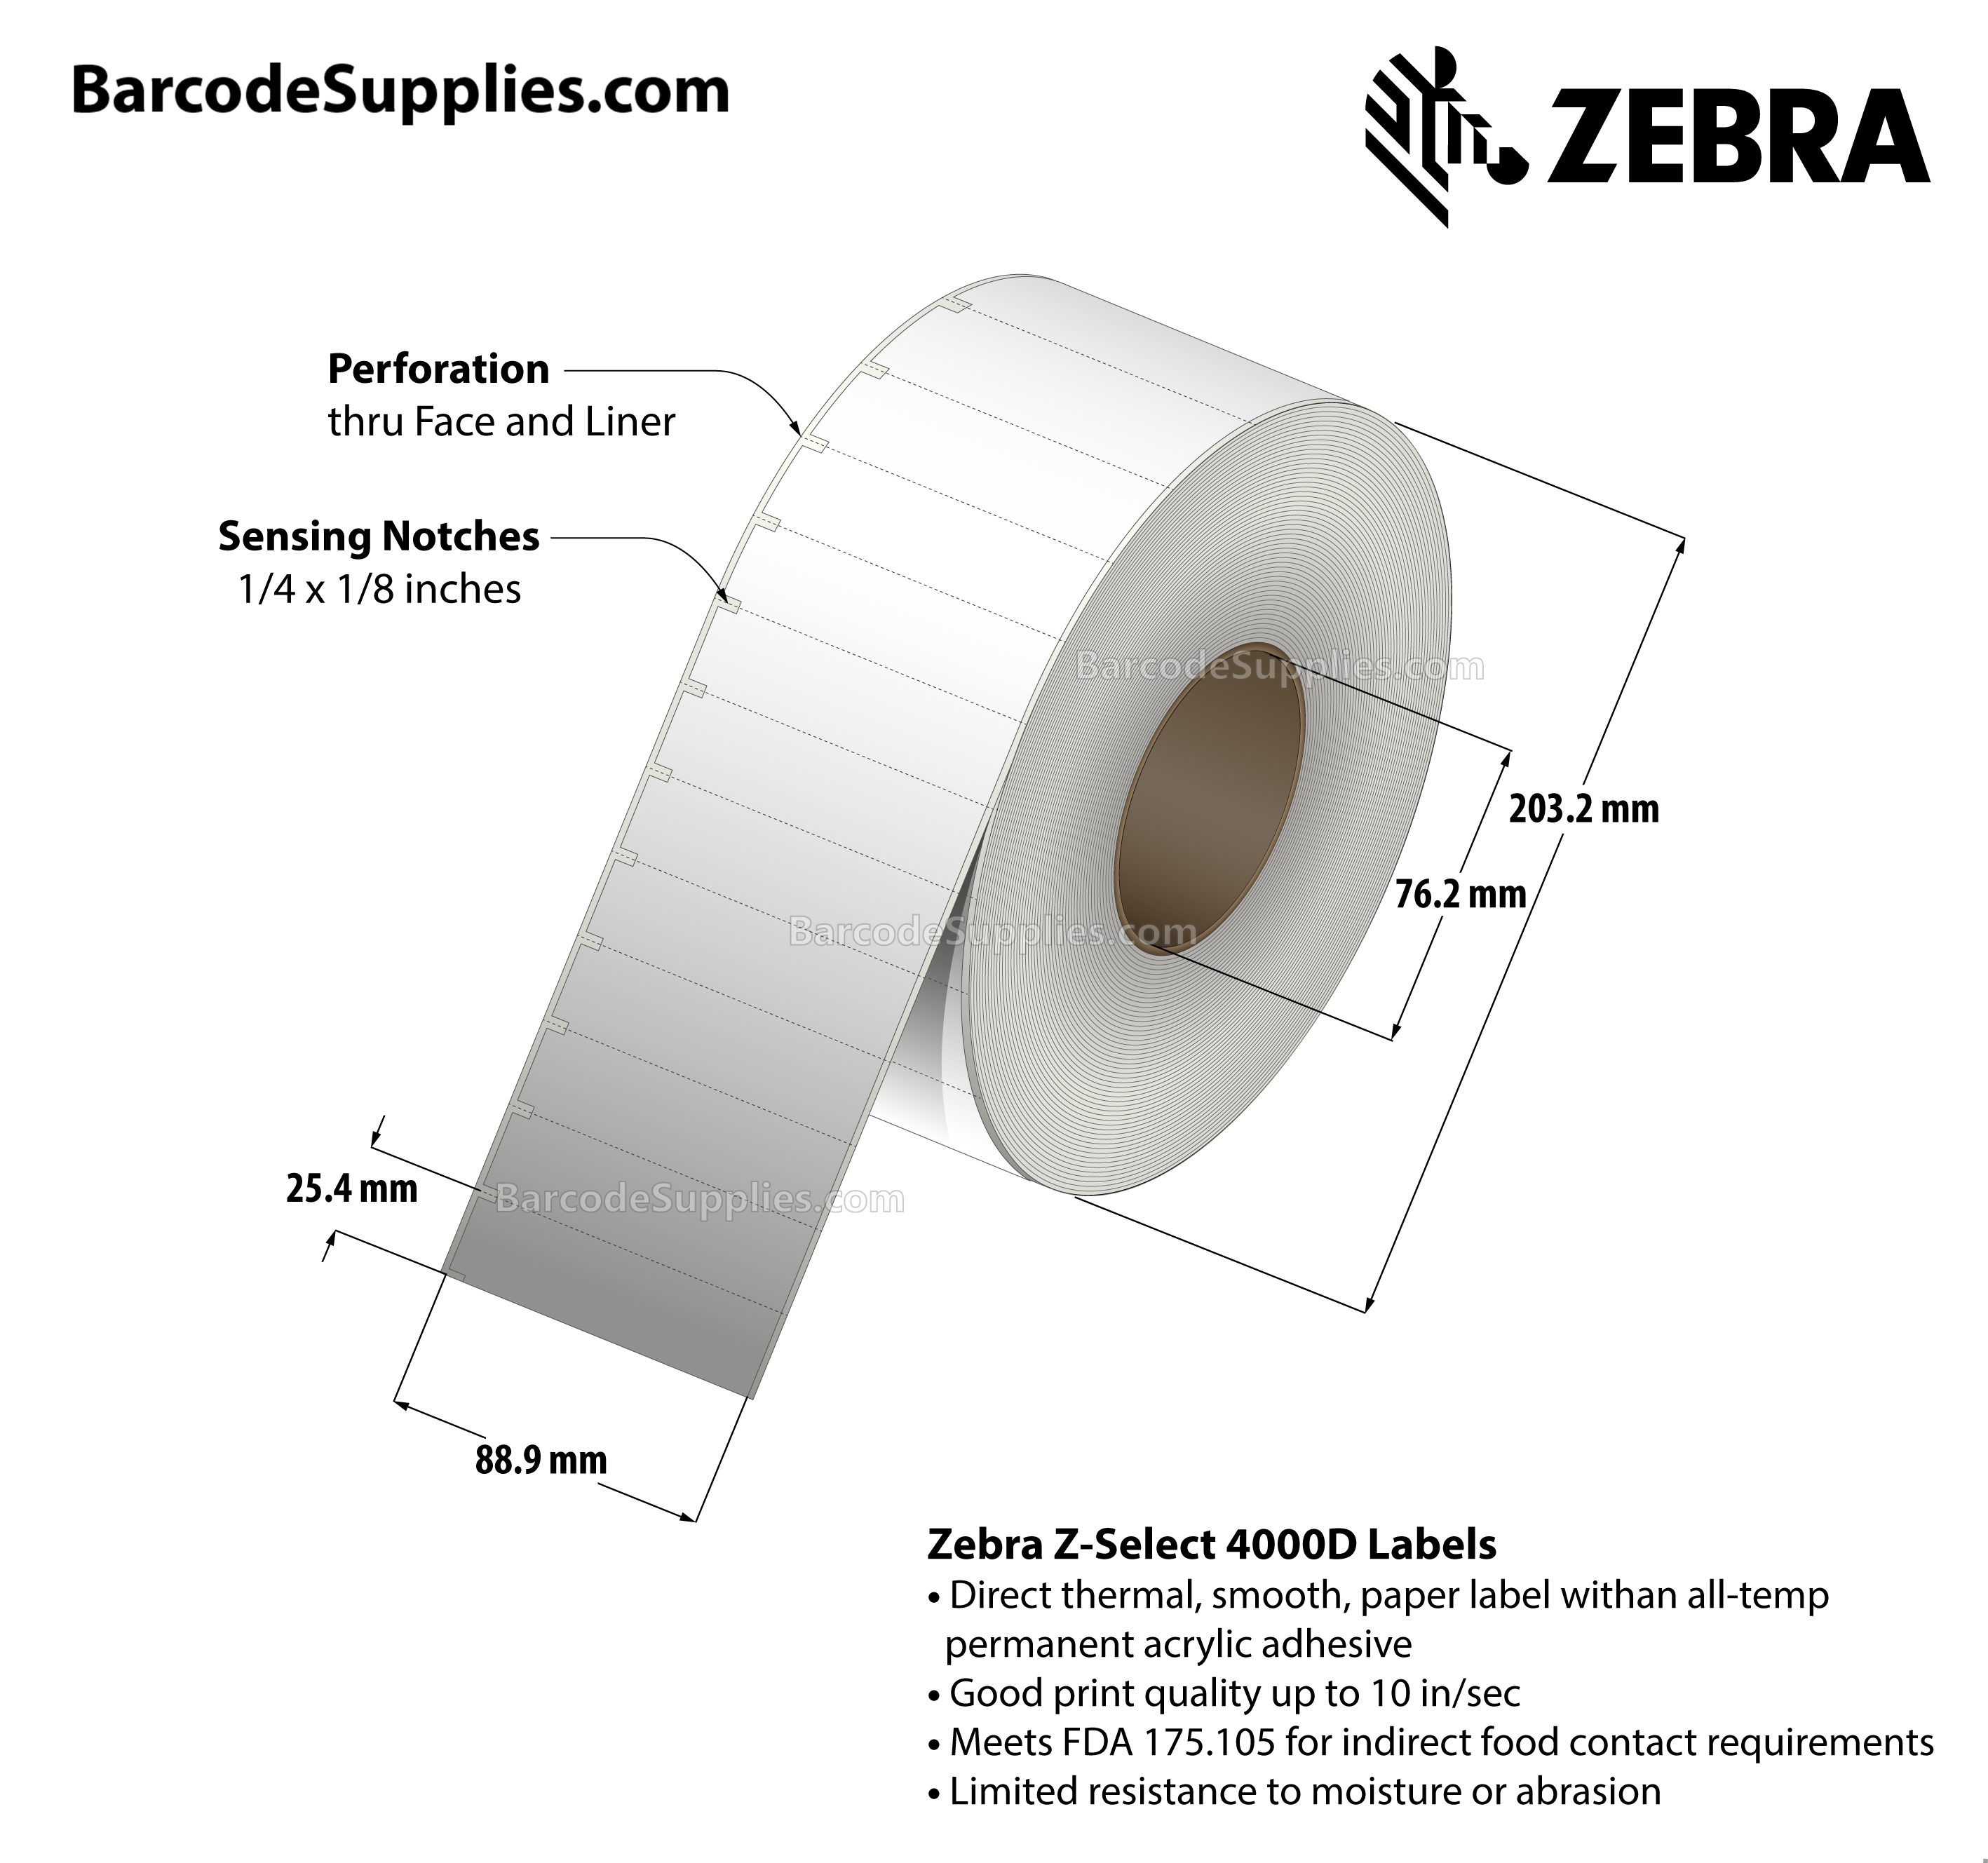 3.5 x 1 Direct Thermal White Z-Select 4000D Labels With All-Temp Adhesive - Label has square edges and sensing notches on left side - Perforated - 5760 Labels Per Roll - Carton Of 6 Rolls - 34560 Labels Total - MPN: HC10000684